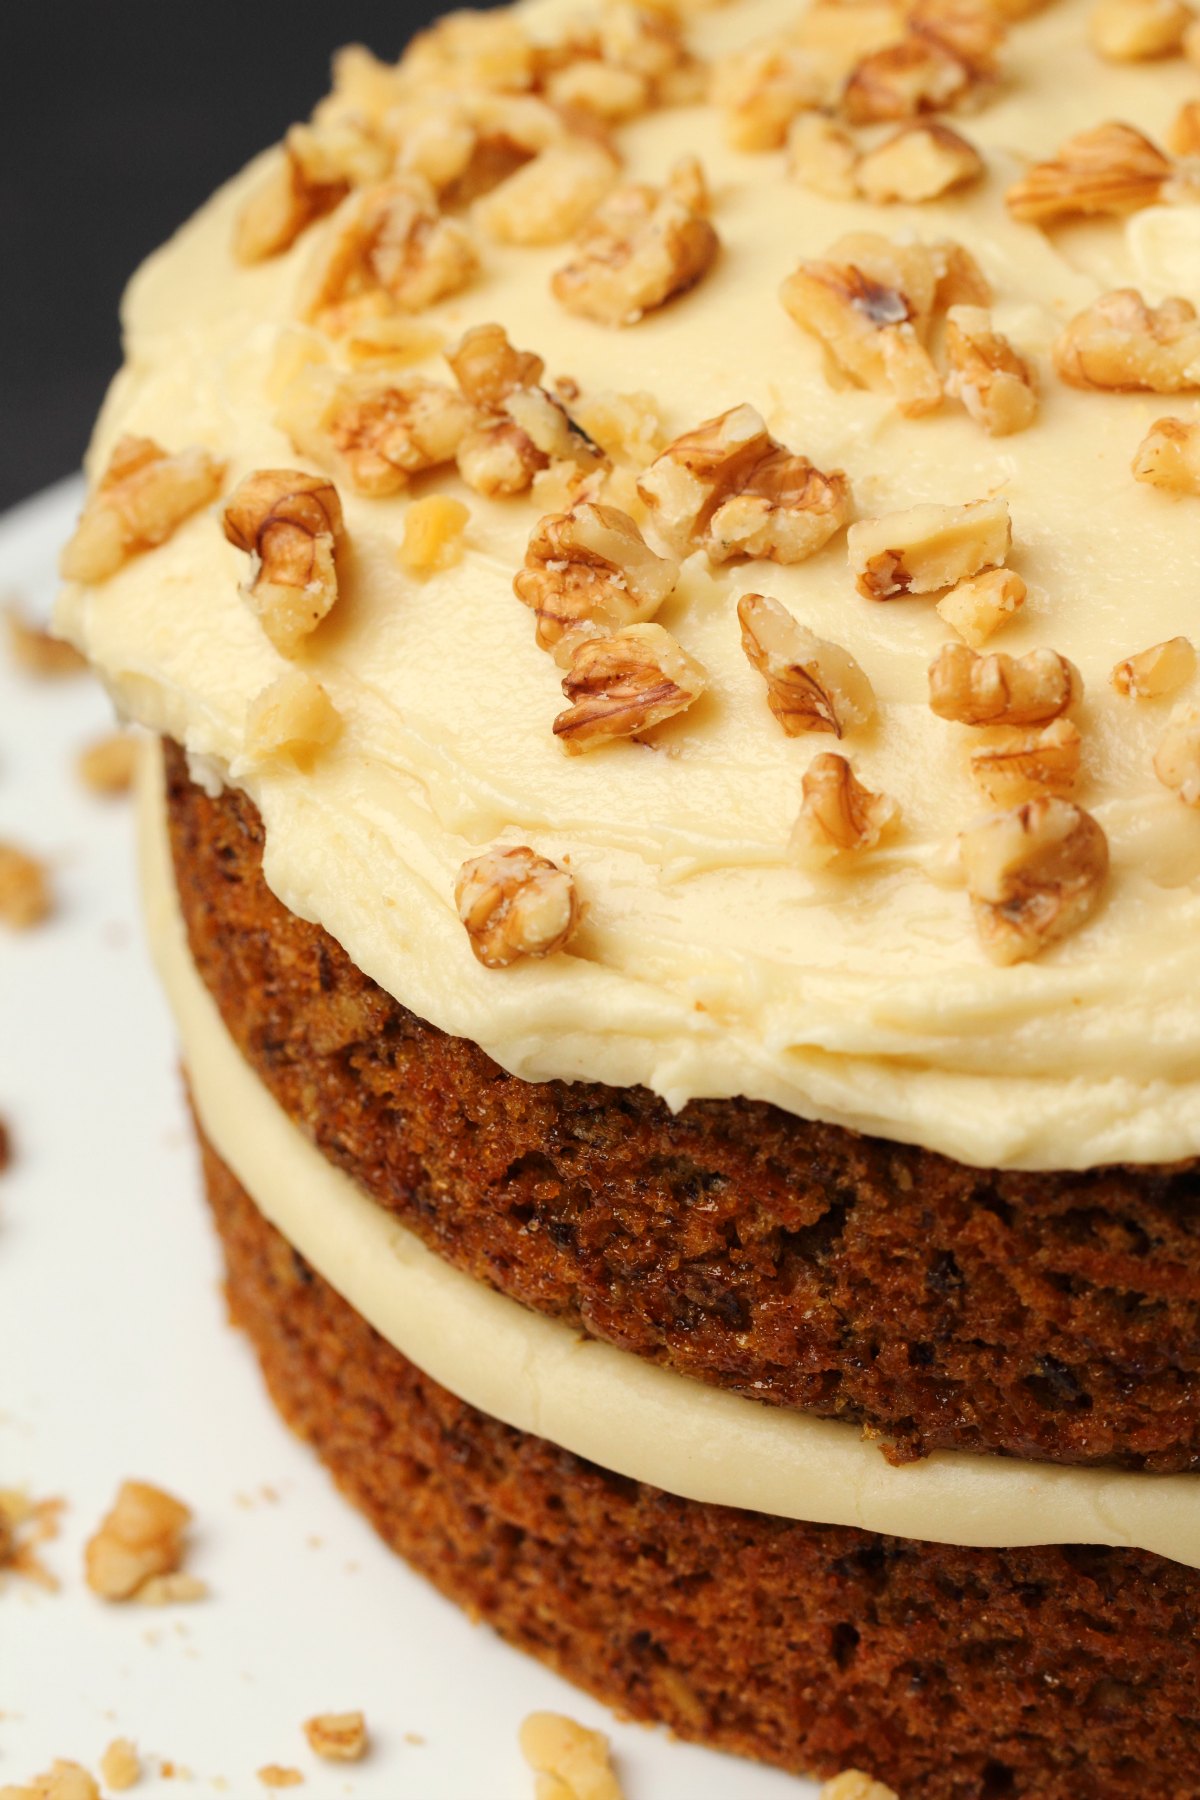 Vegan cream cheese frosting topped with crushed walnuts on a carrot cake. 